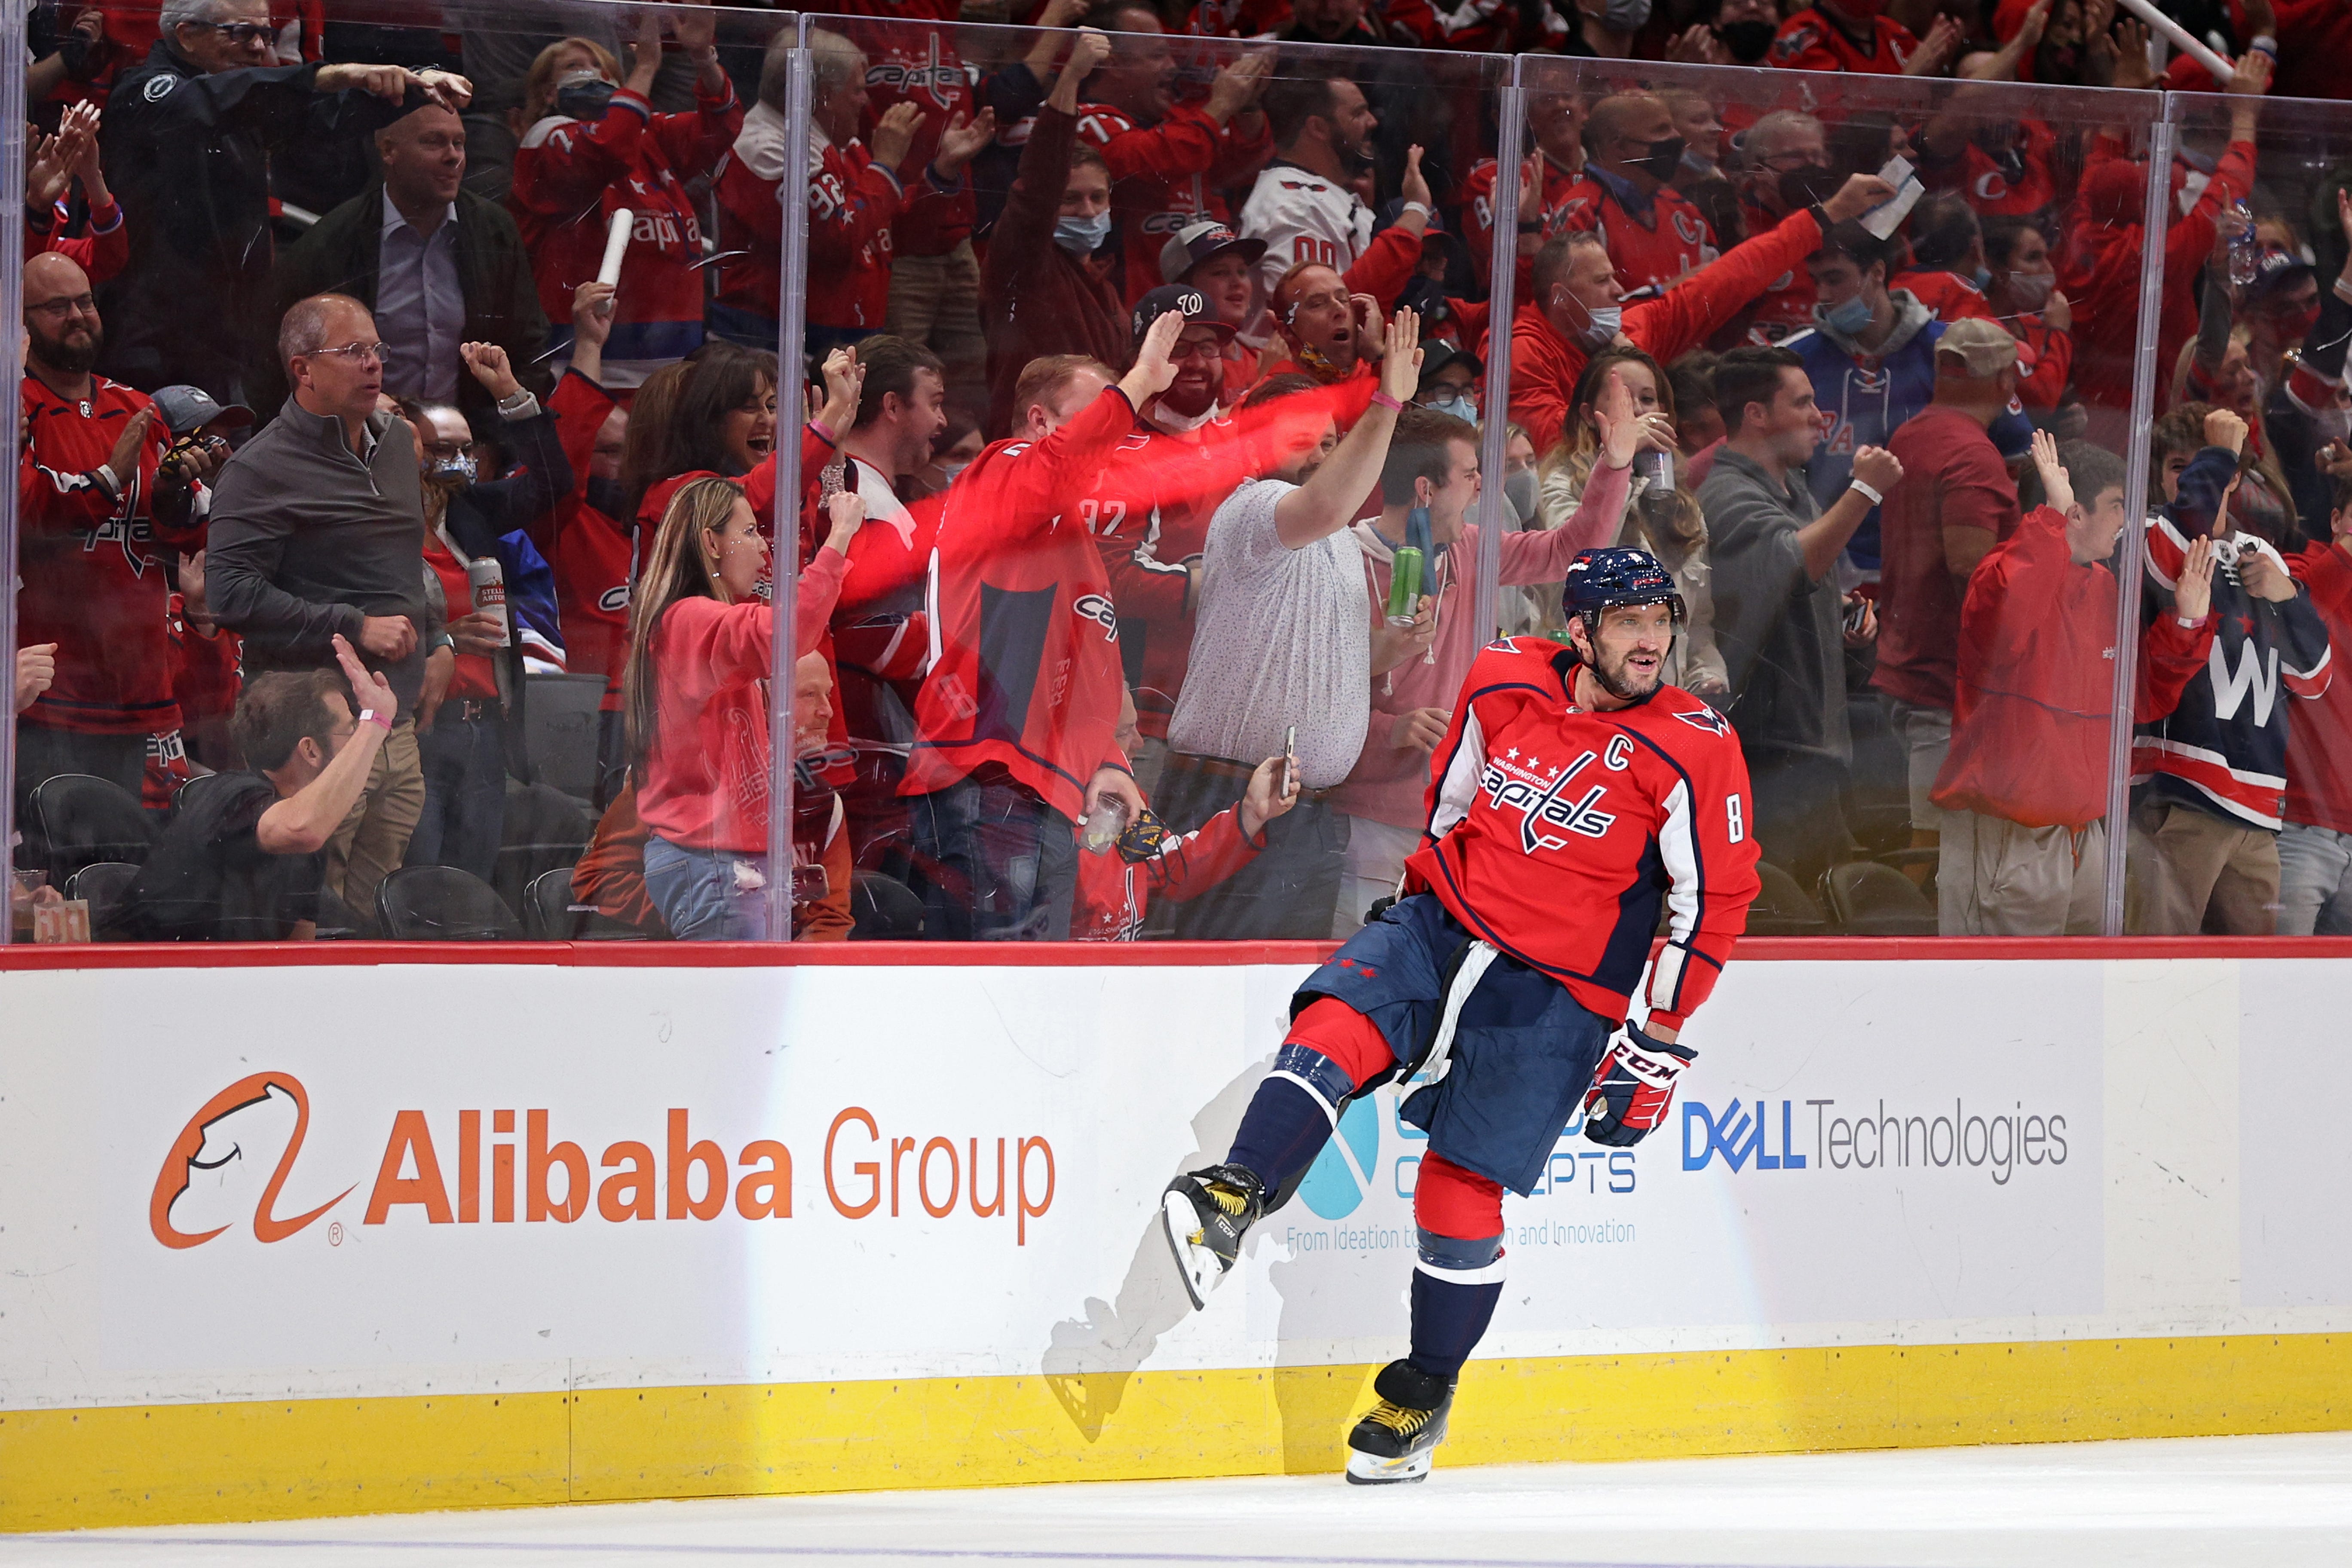 Alex Ovechkin scores twice in Capitals' opener to vault into fifth place on all-time goals list